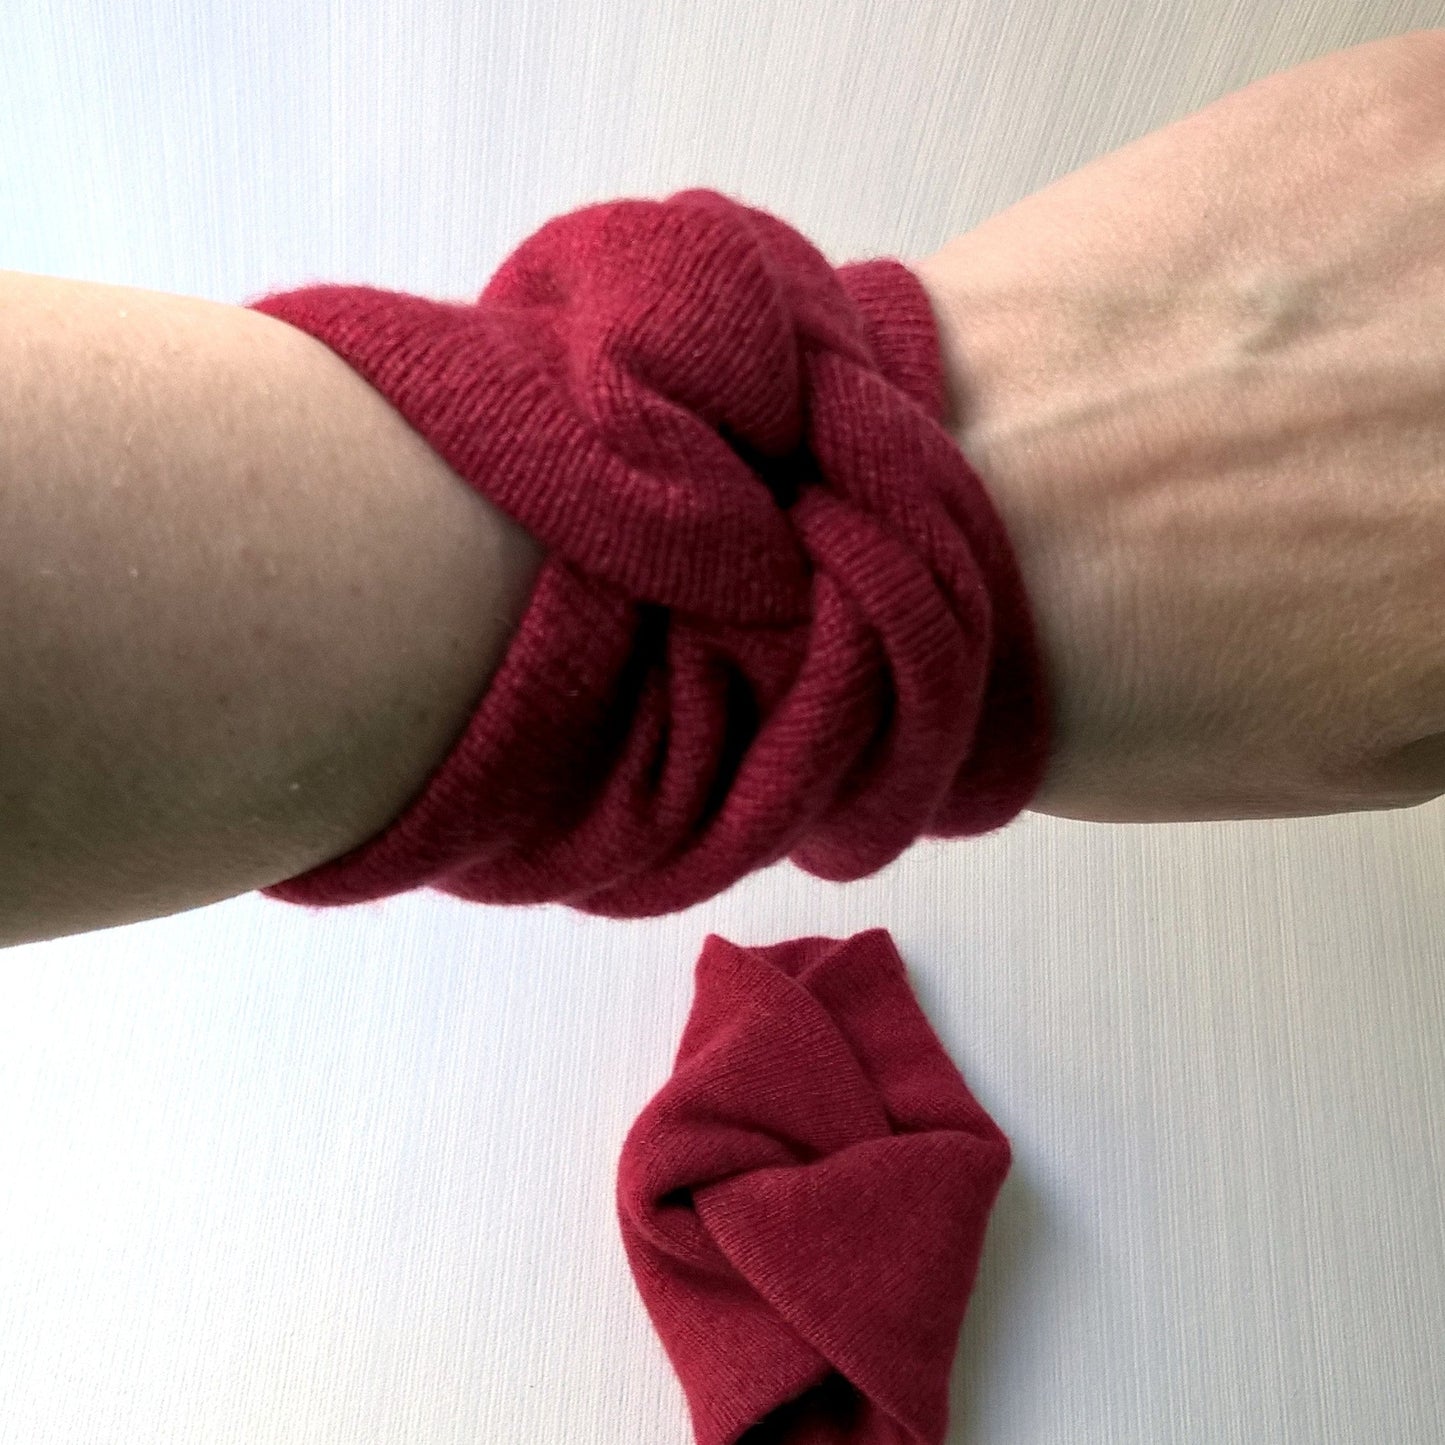 Ruby red pure cashmere wrist warmers in a short wrist knot design